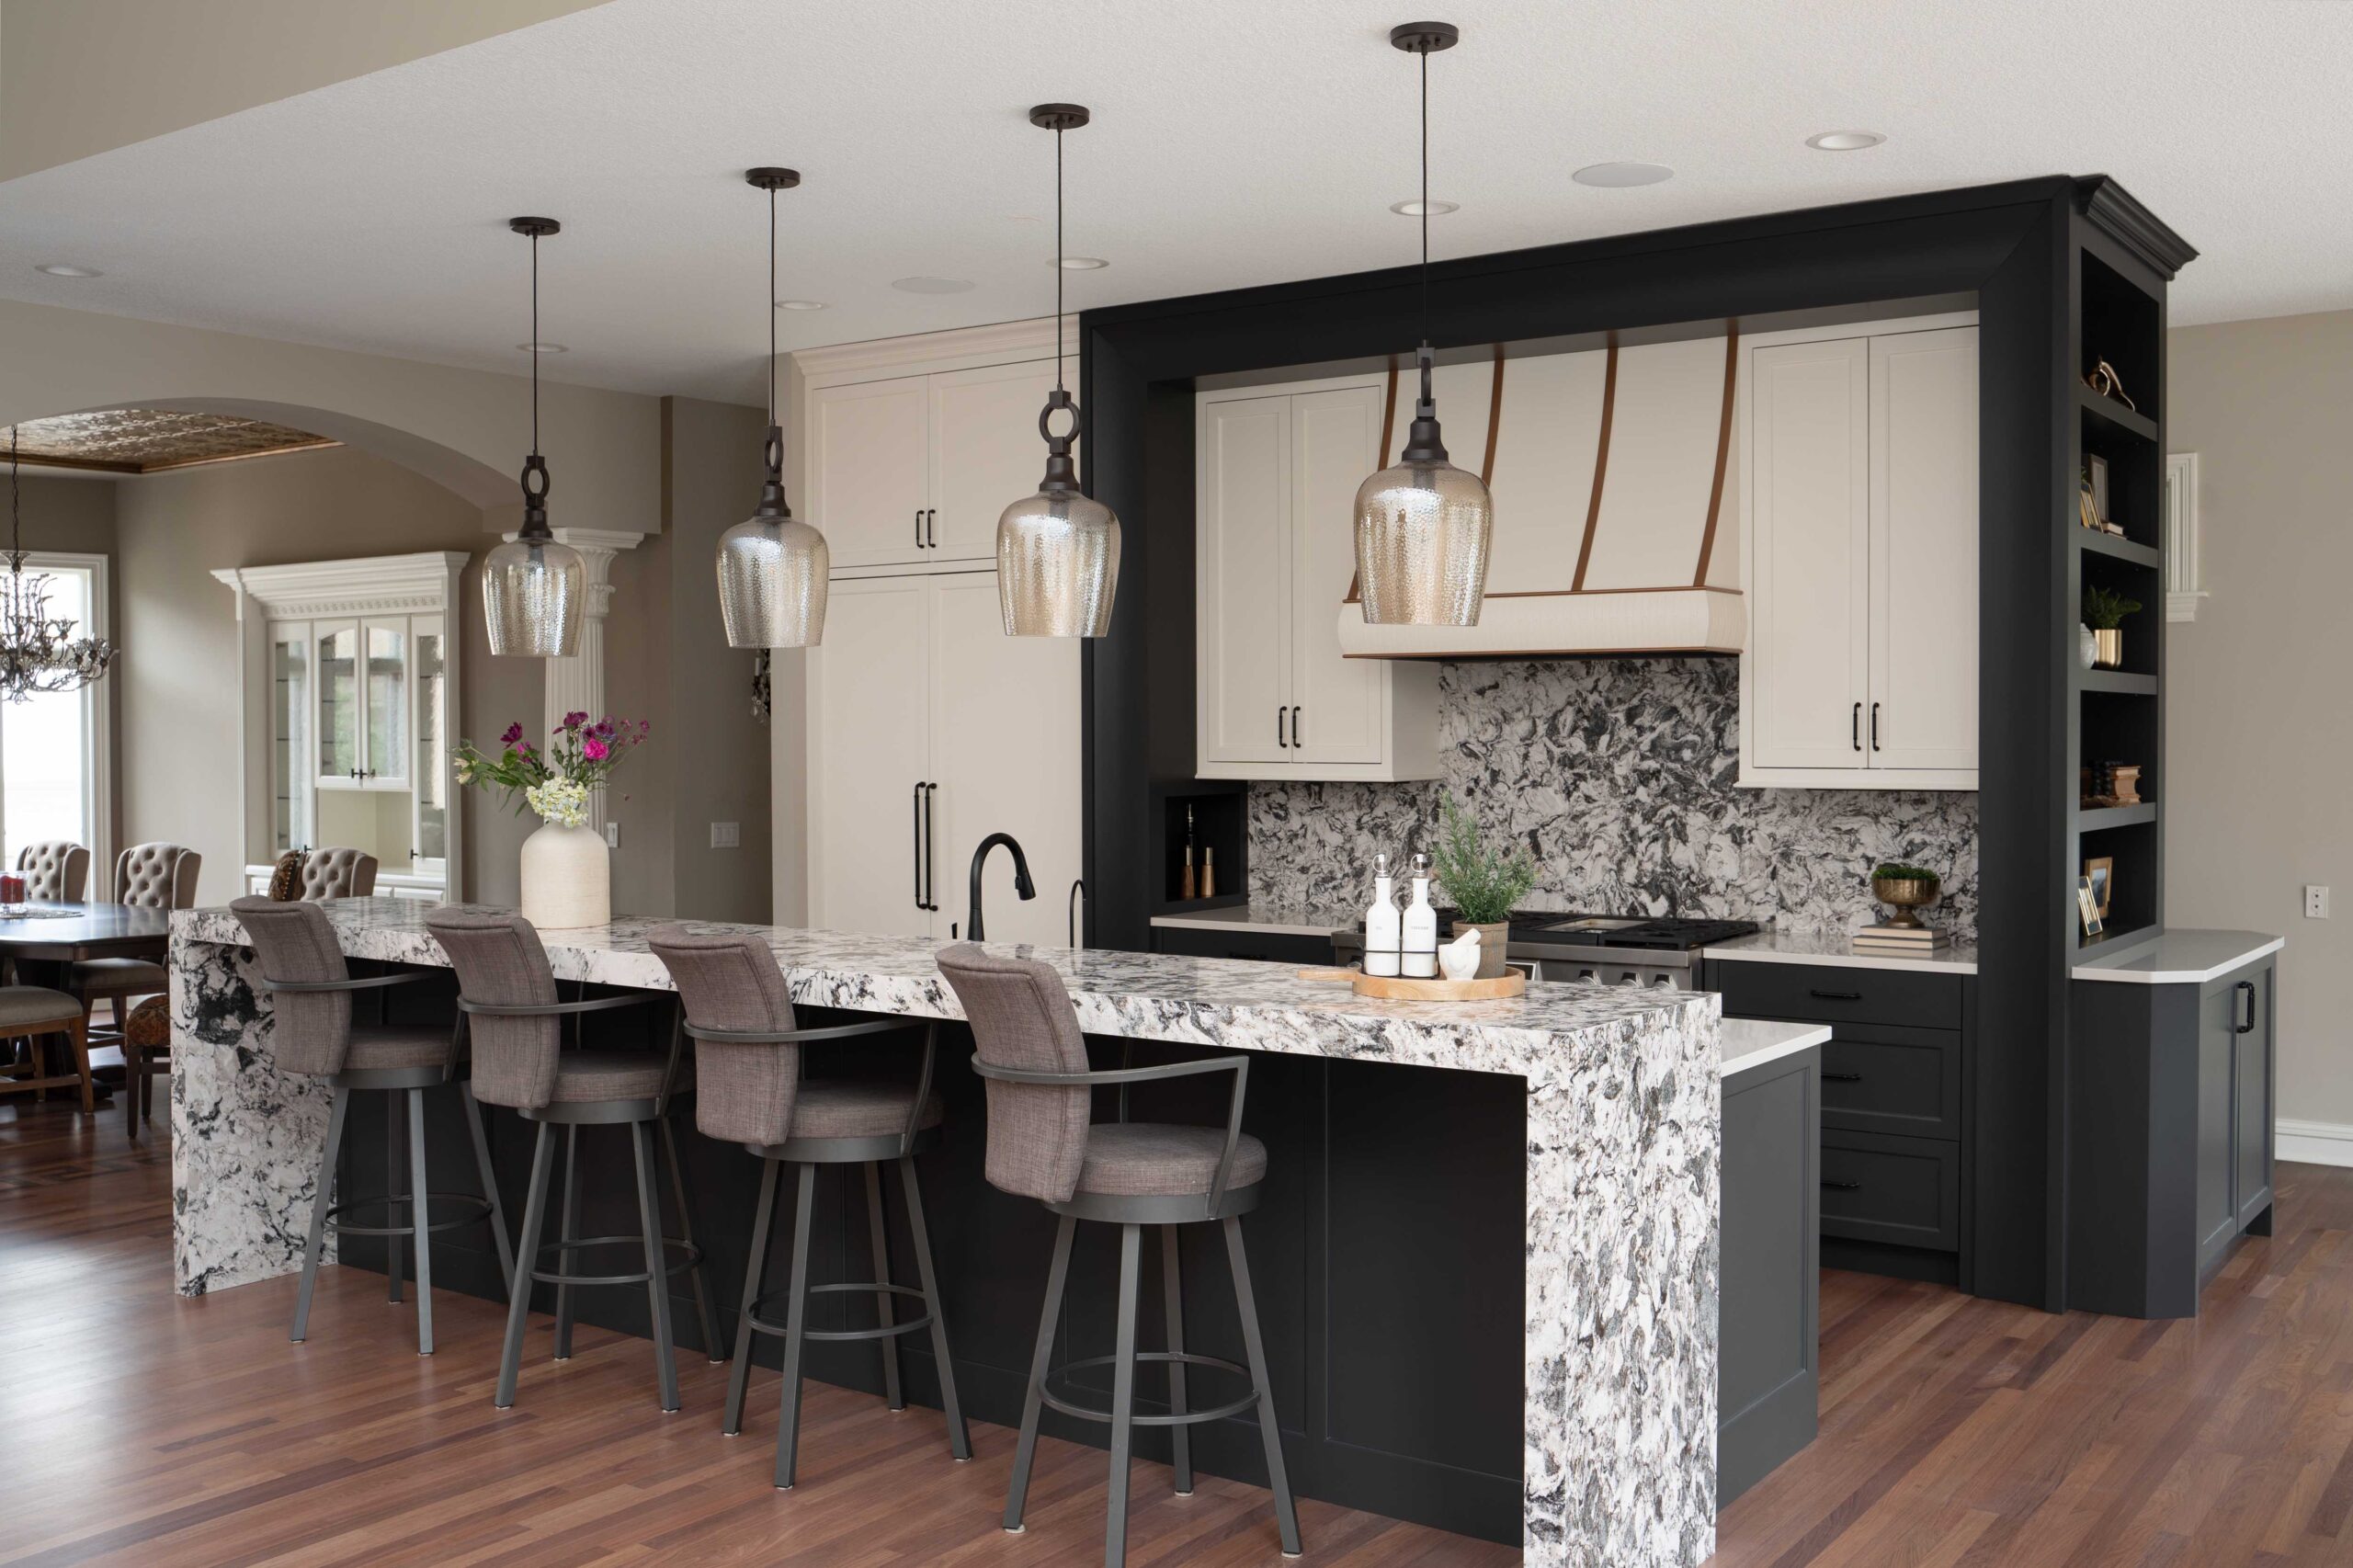 A modern kitchen featuring marble counter tops and bar stools.